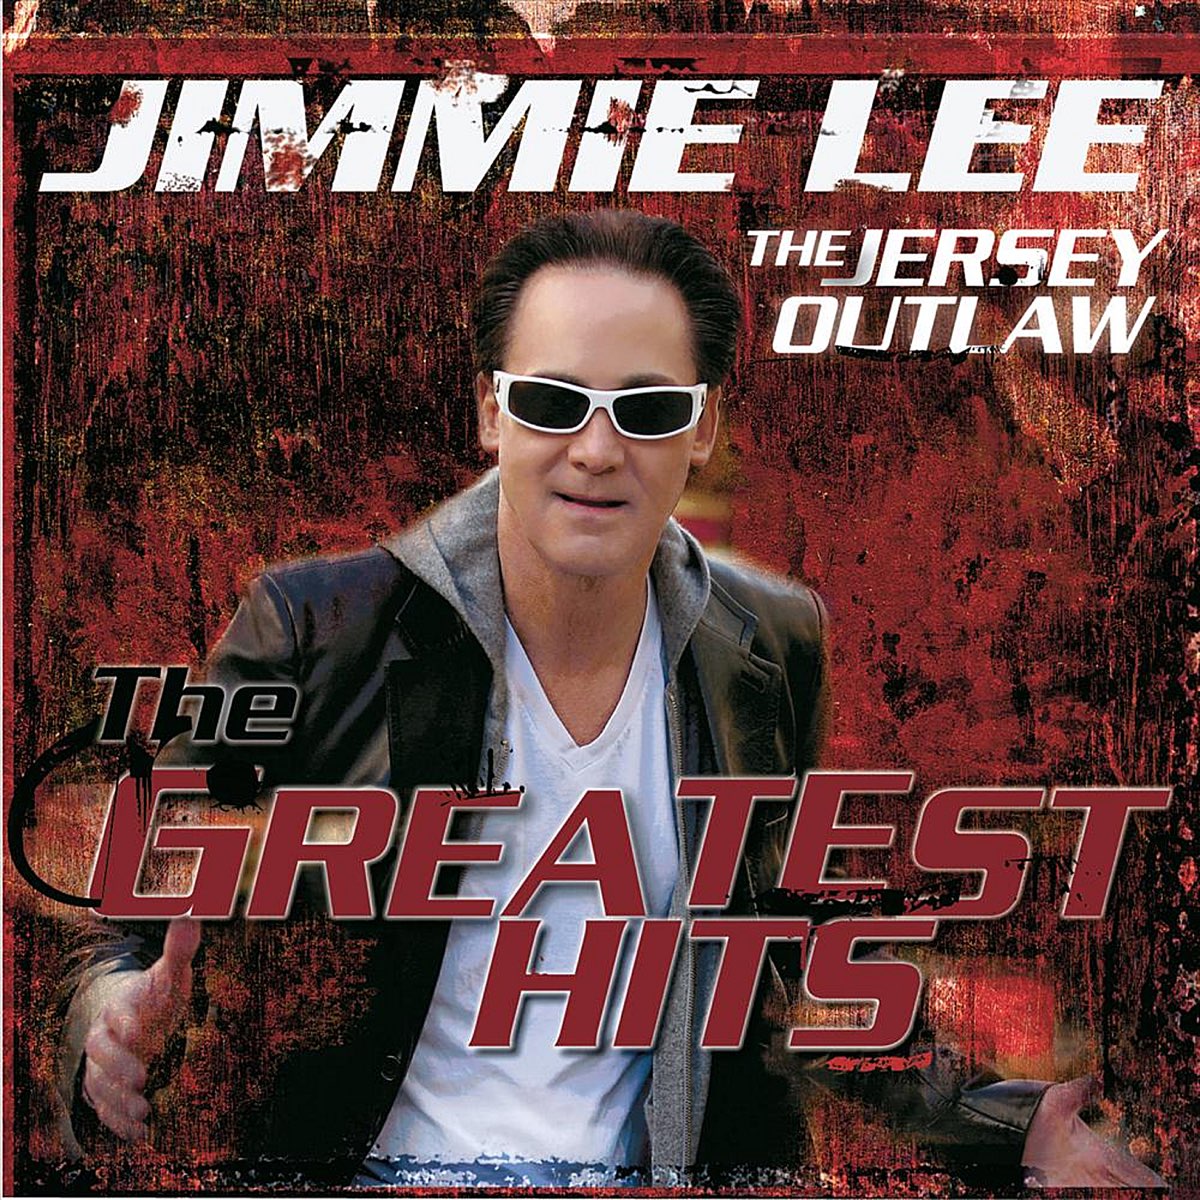 The Greatest Hits by Jimmie Lee the Jersey Outlaw on Apple Music